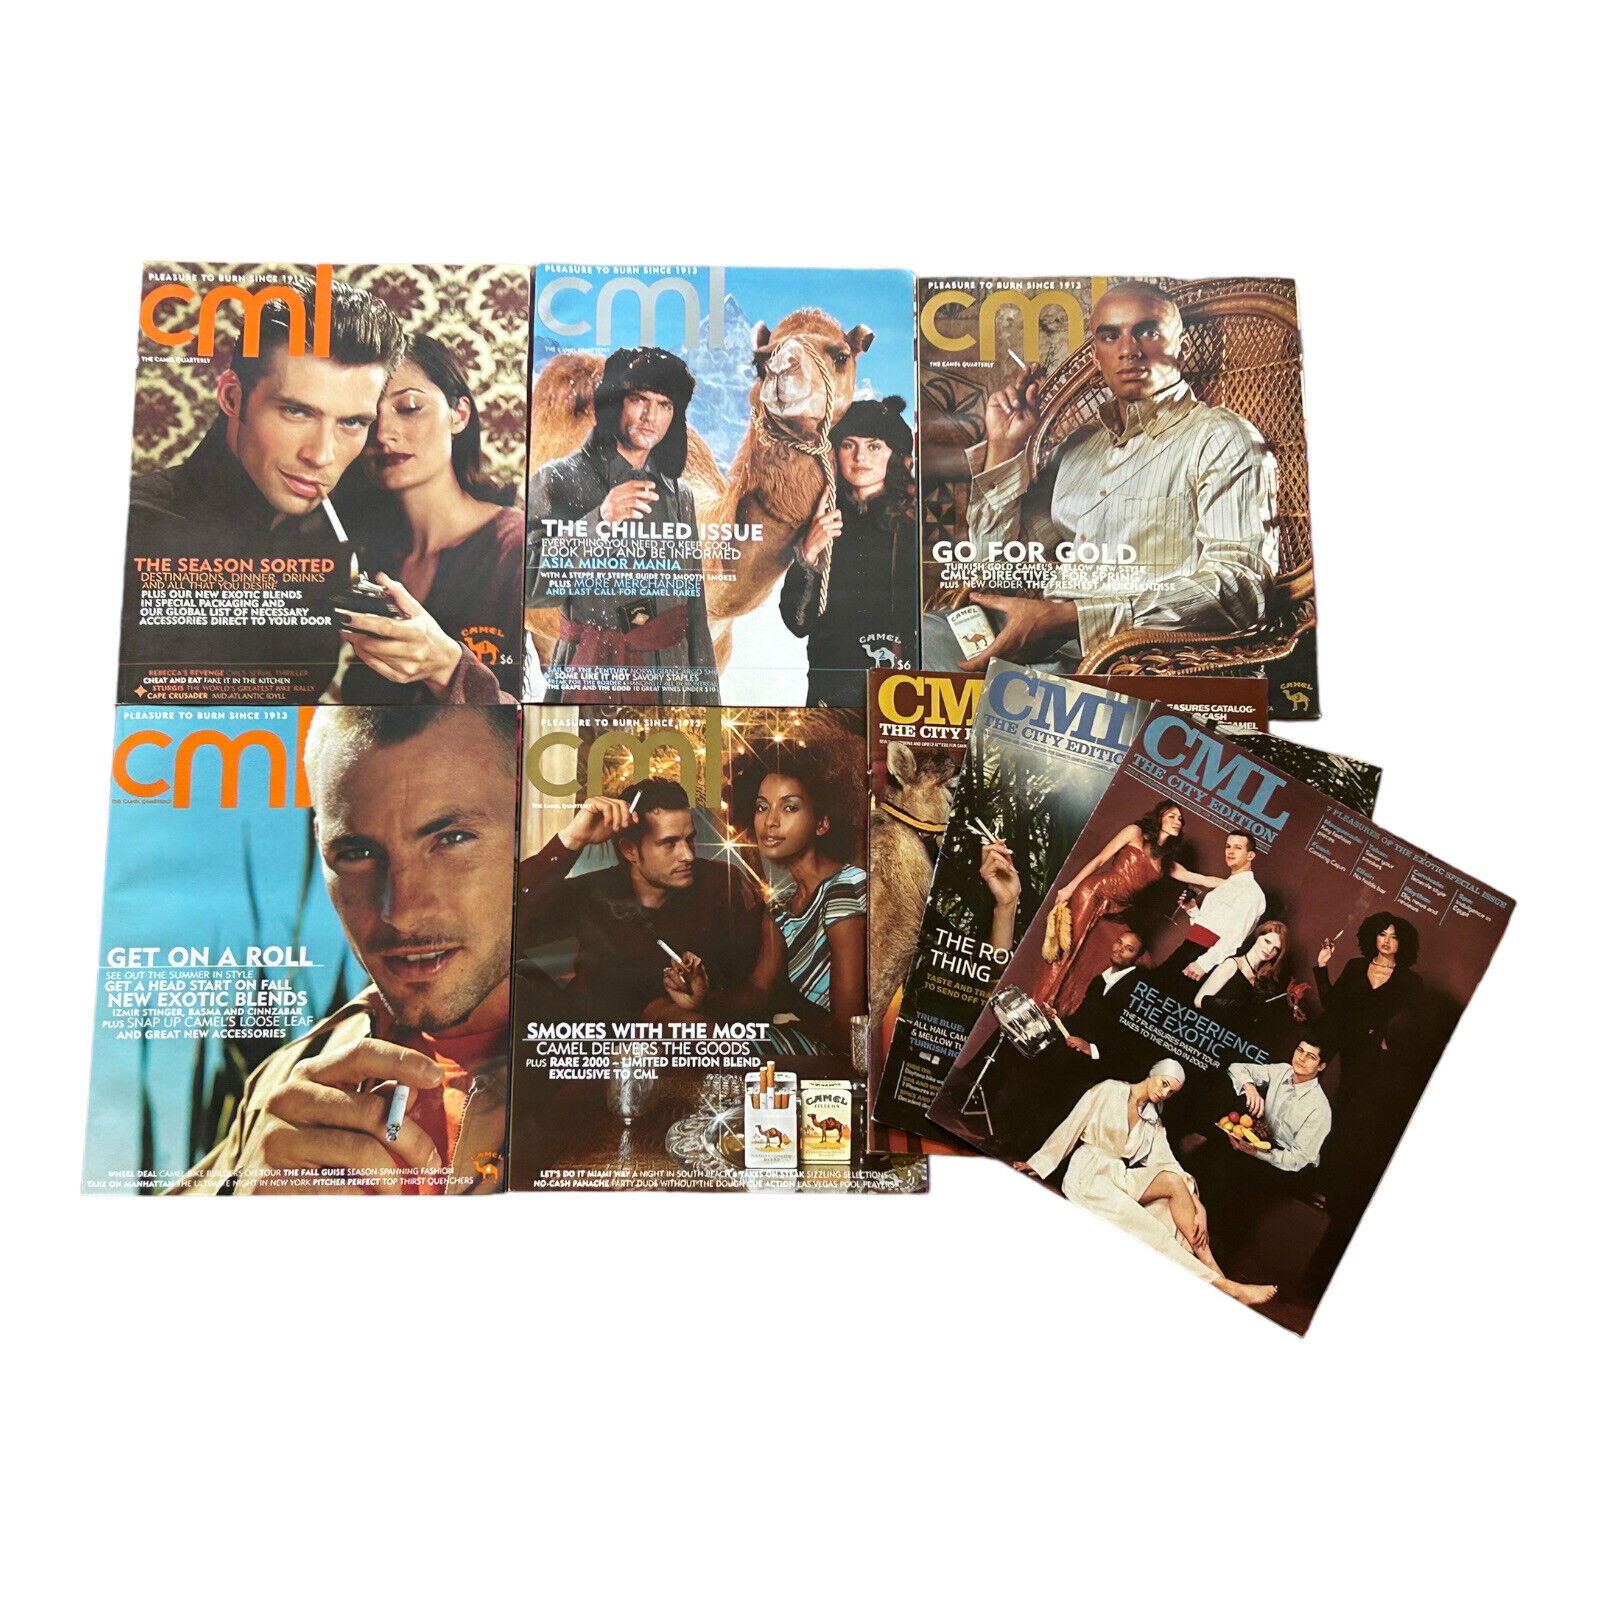 CML Magazine 1-5 and extras Camel Tobacco 2000-2001